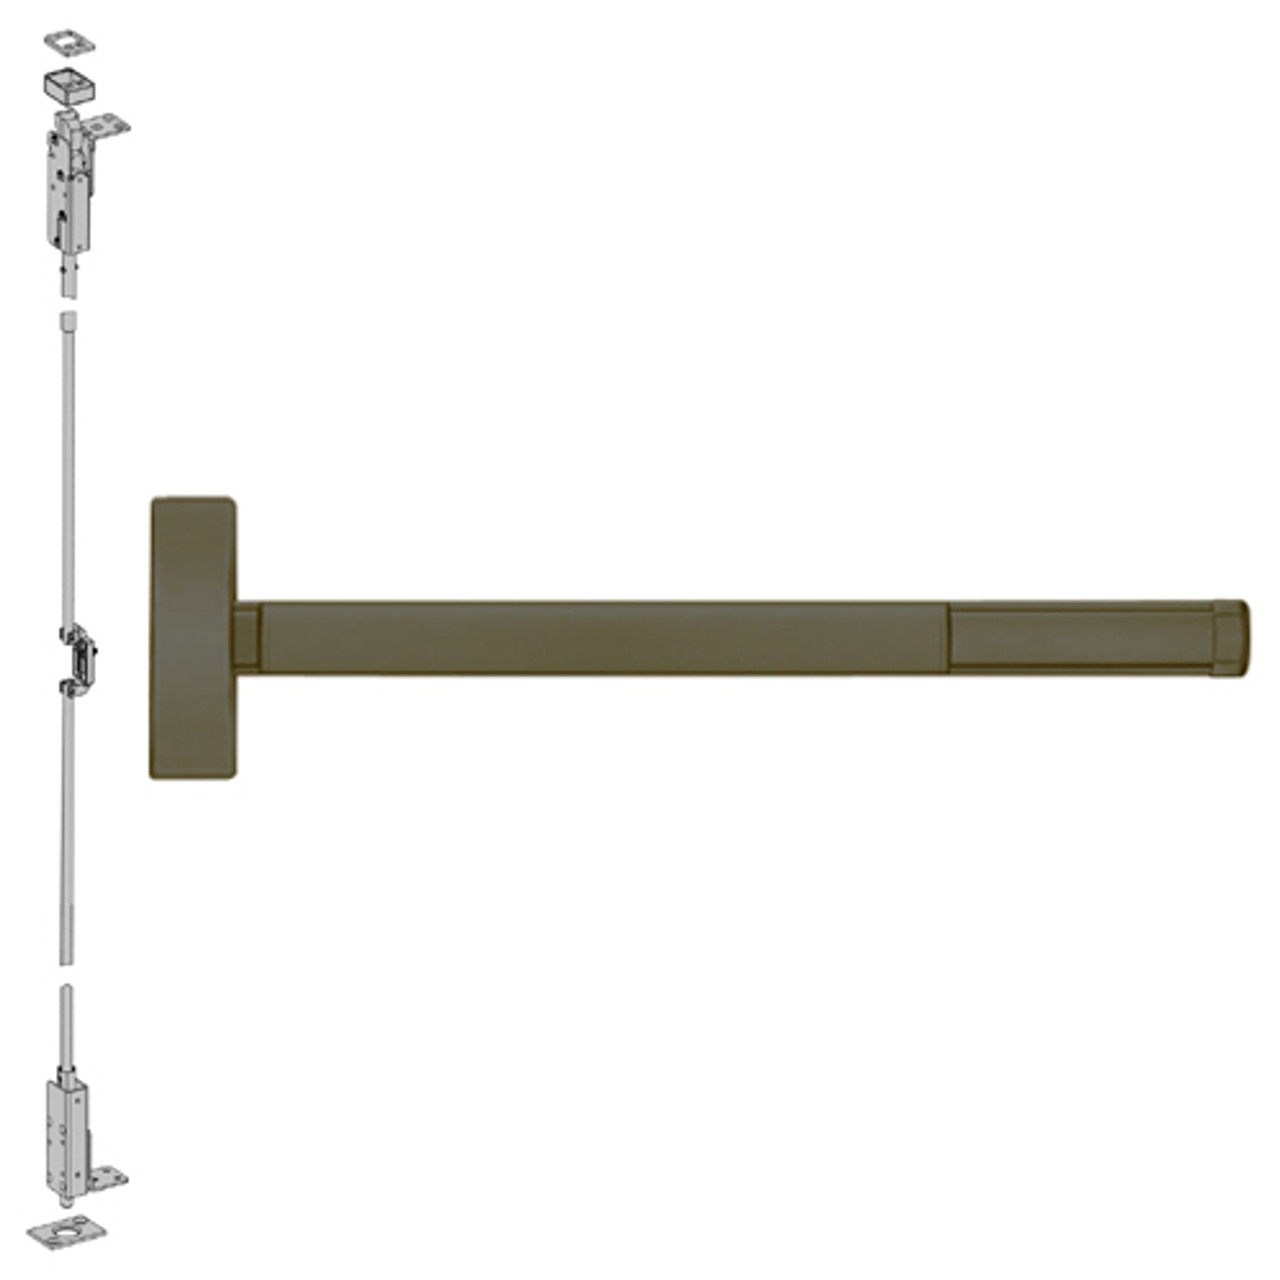 FL2703LBR-613-36 PHI 2700 Series Fire Rated Wood Door Concealed Vertical Exit Device Prepped for Key Retracts Latchbolt in Oil Rubbed Bronze Finish